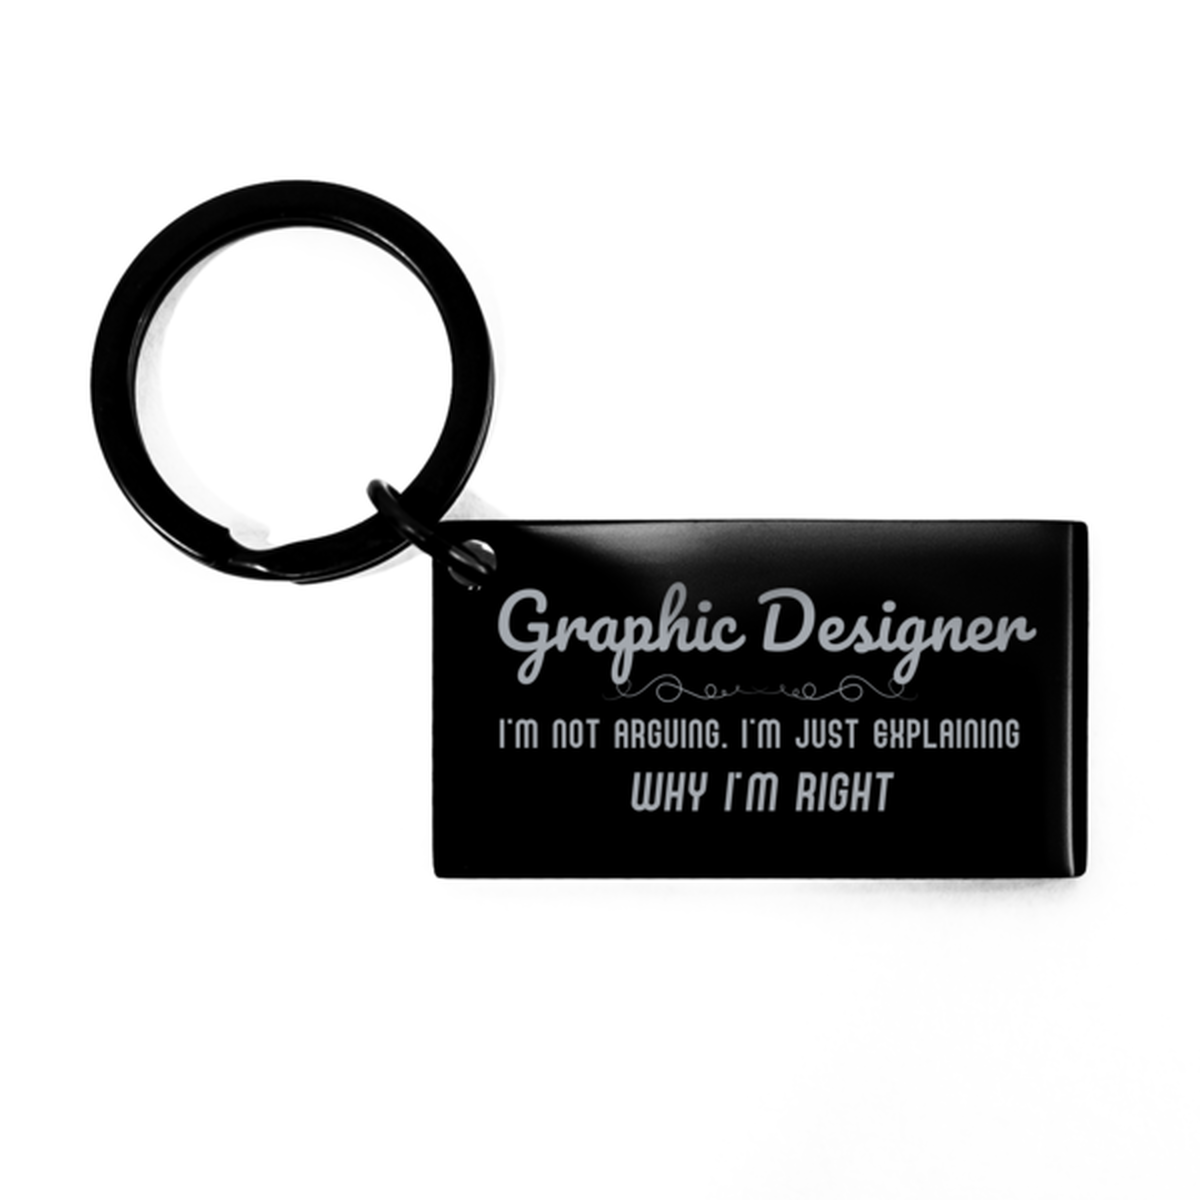 Graphic Designer I'm not Arguing. I'm Just Explaining Why I'm RIGHT Keychain, Funny Saying Quote Graphic Designer Gifts For Graphic Designer Graduation Birthday Christmas Gifts for Men Women Coworker